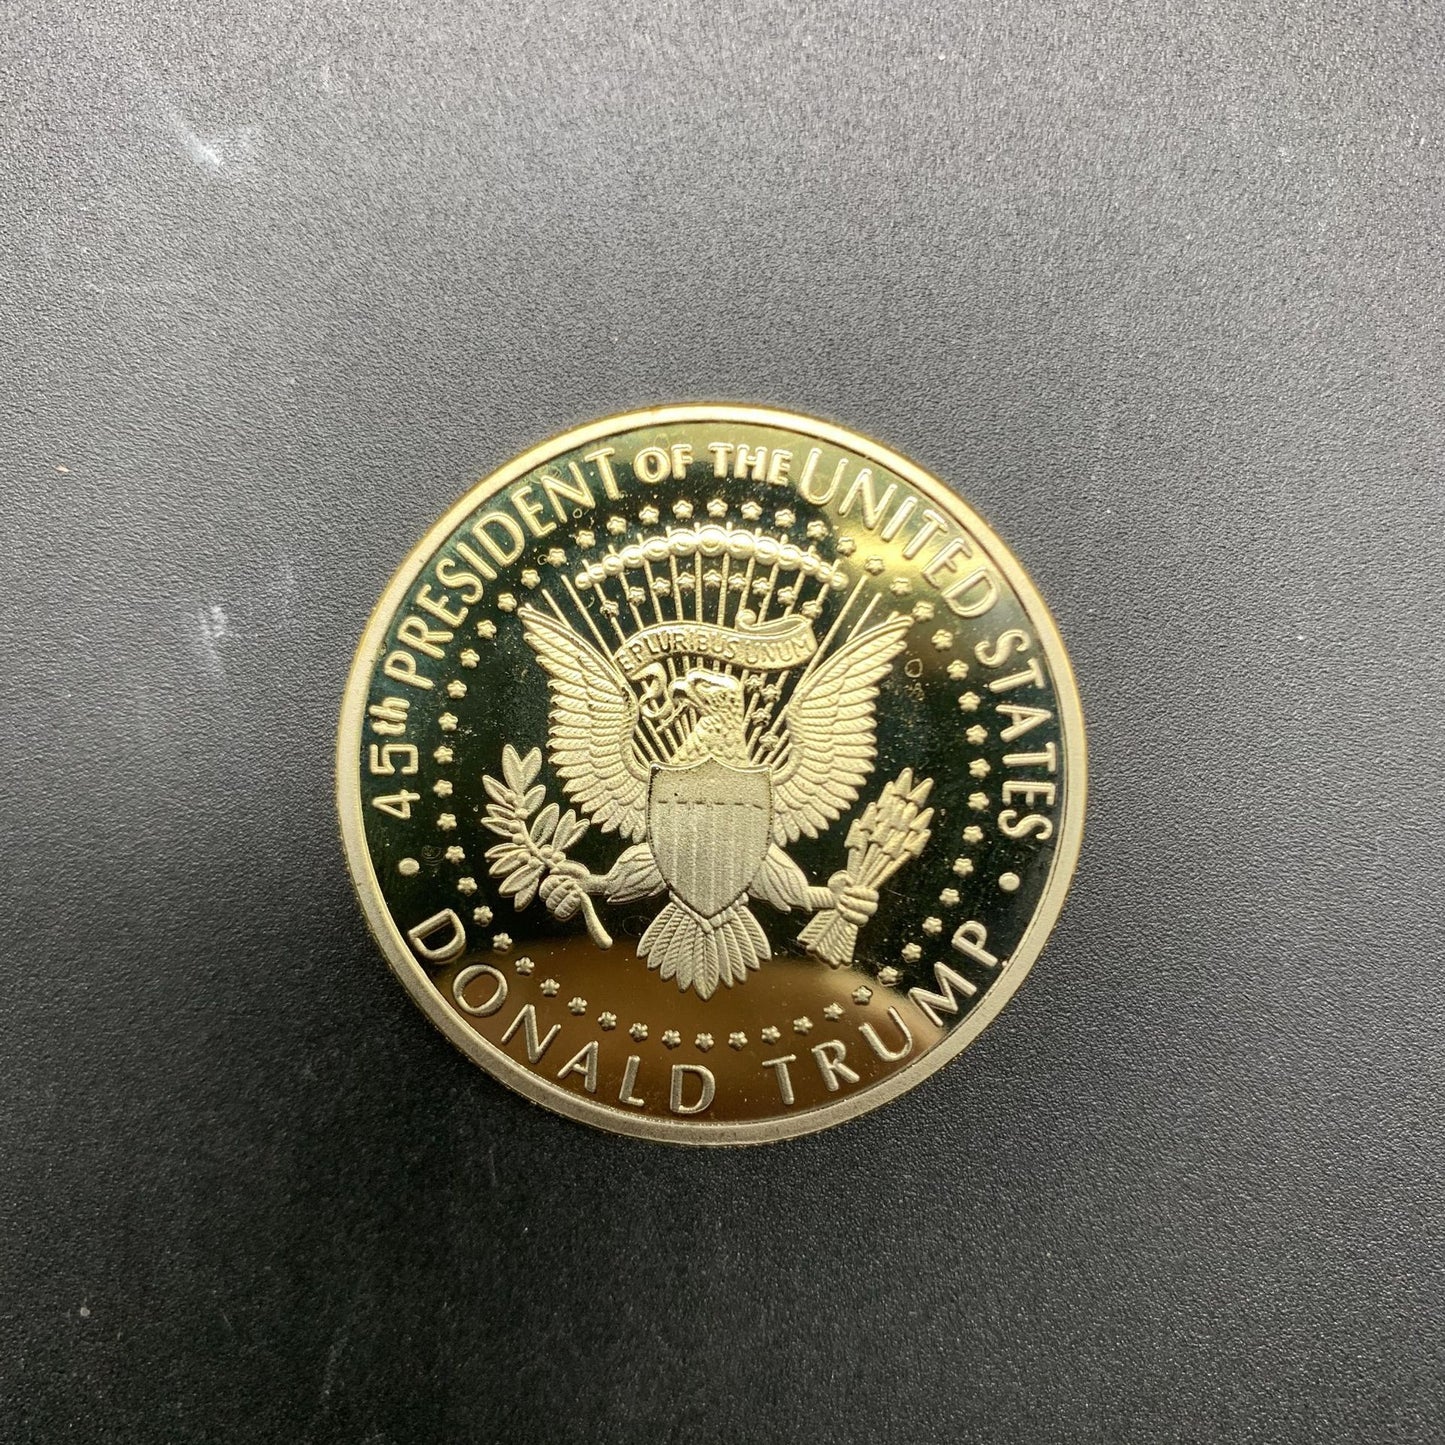 Electroplating commemorative coins